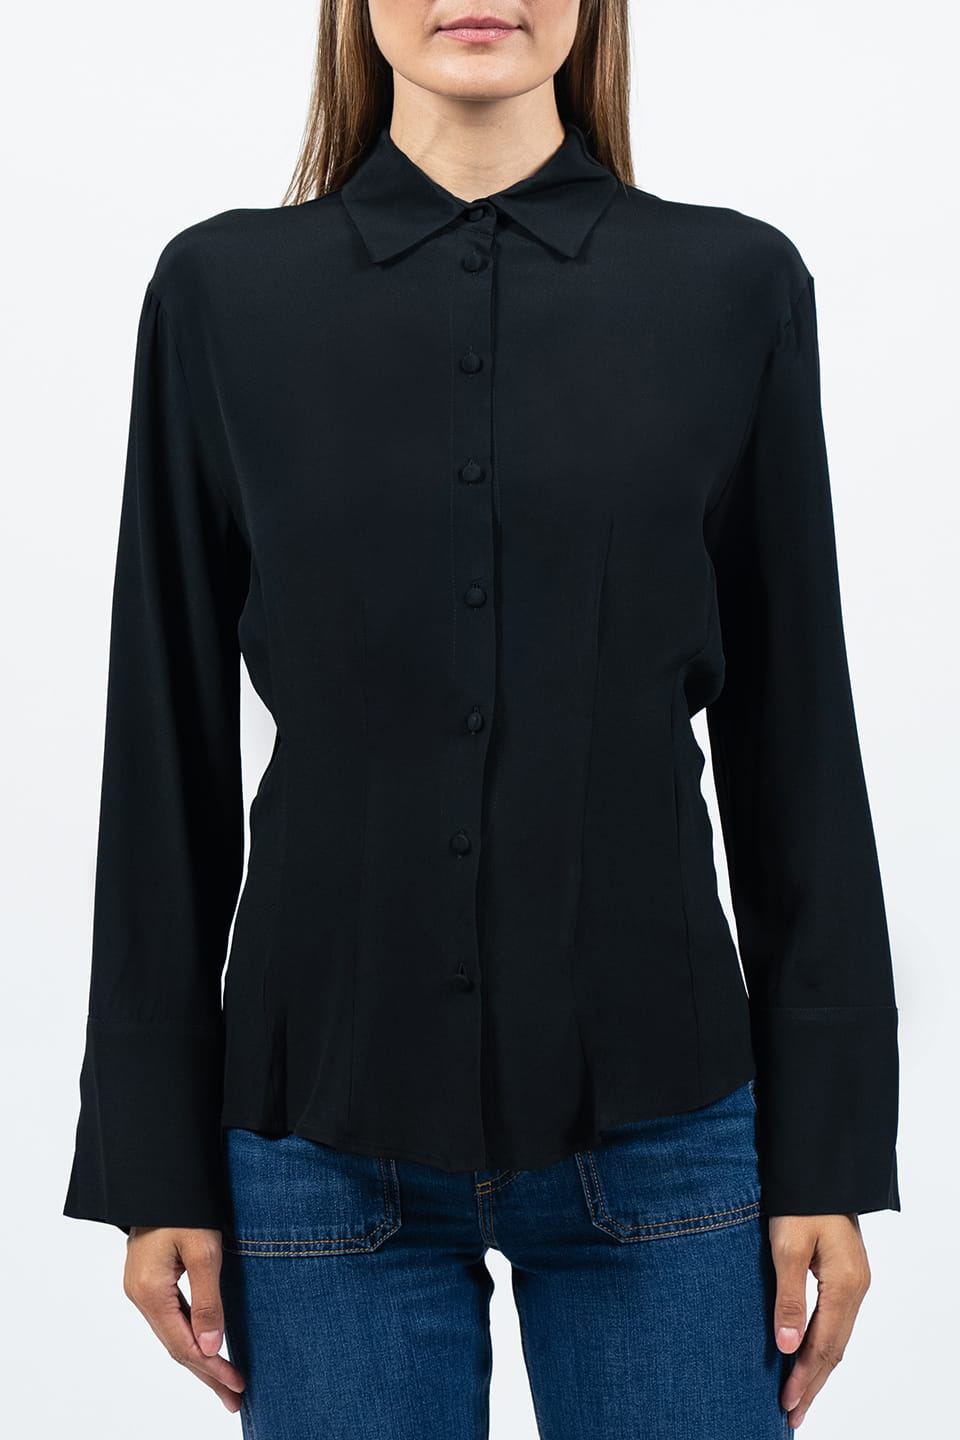 Shop online trendy Black Women long sleeve from Federica Tosi Fashion designer. Product gallery 1